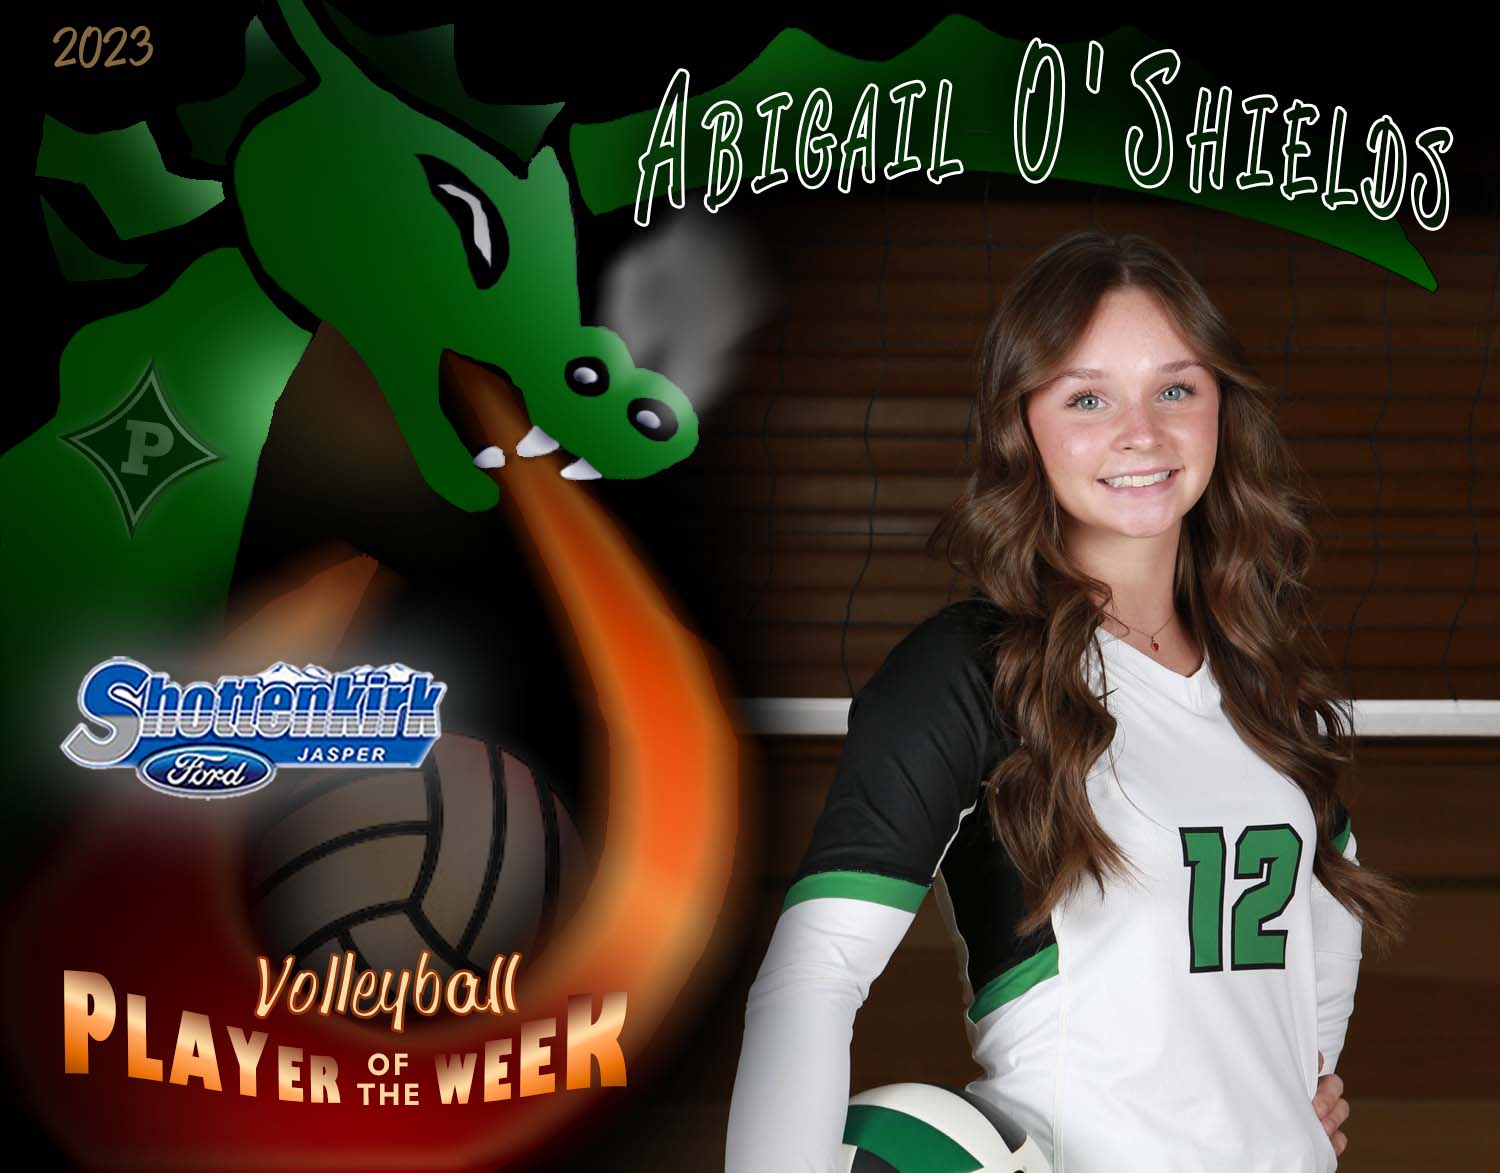 PHS Volleyball Player of the Week #5 - Abigail O'Shields